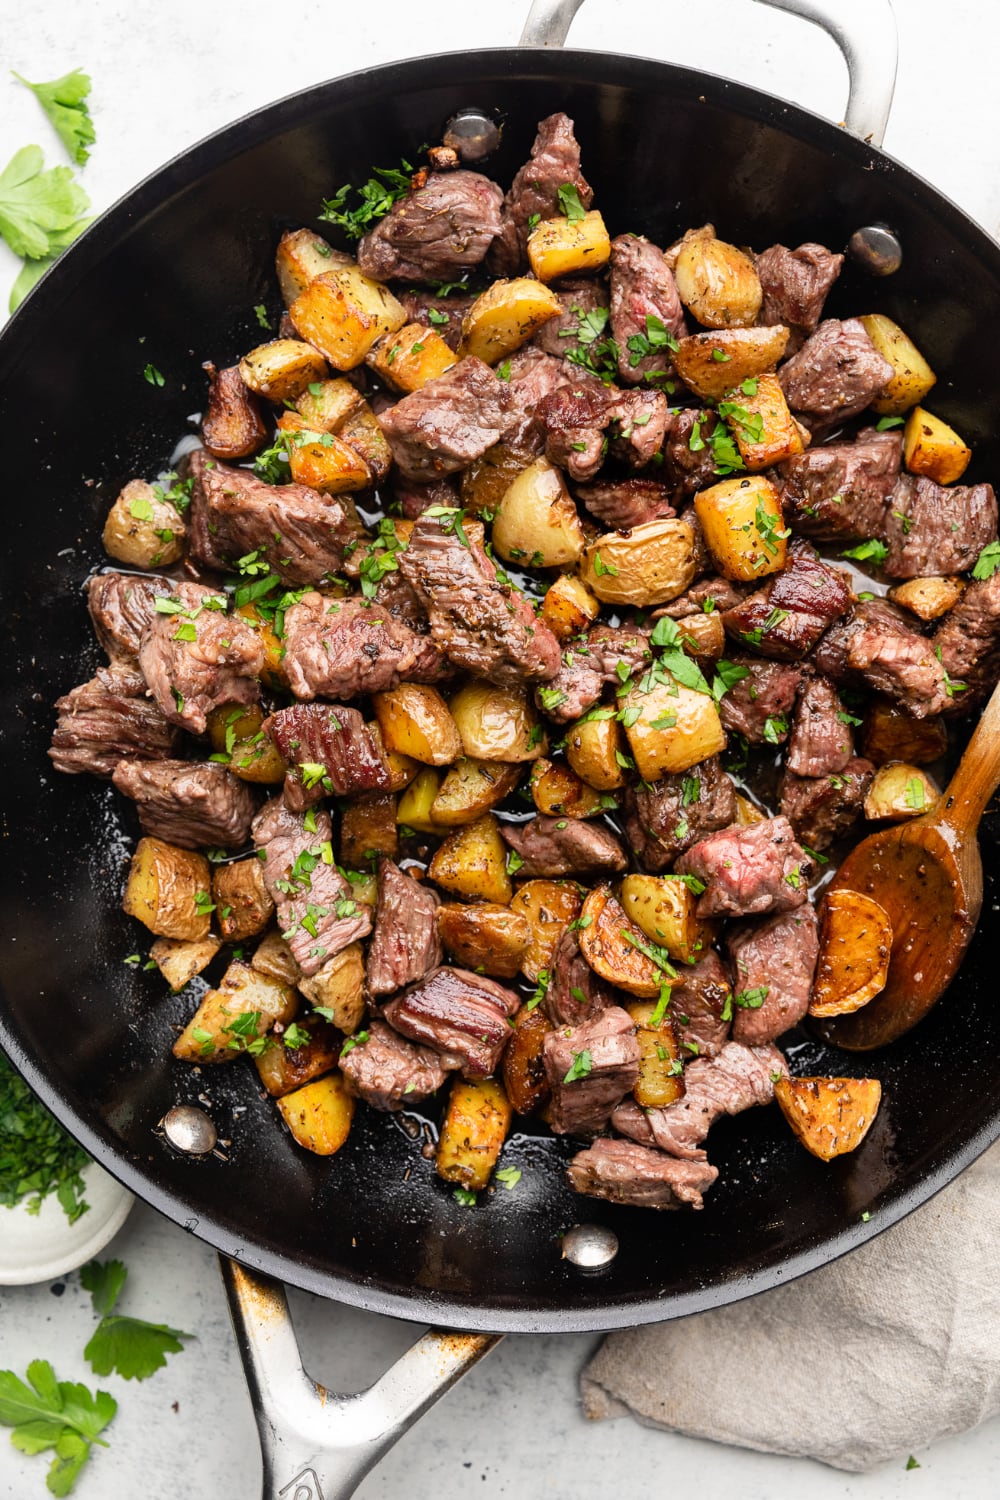 A skillet with finished garlic steak bites and potatoes with a wooden spoon.